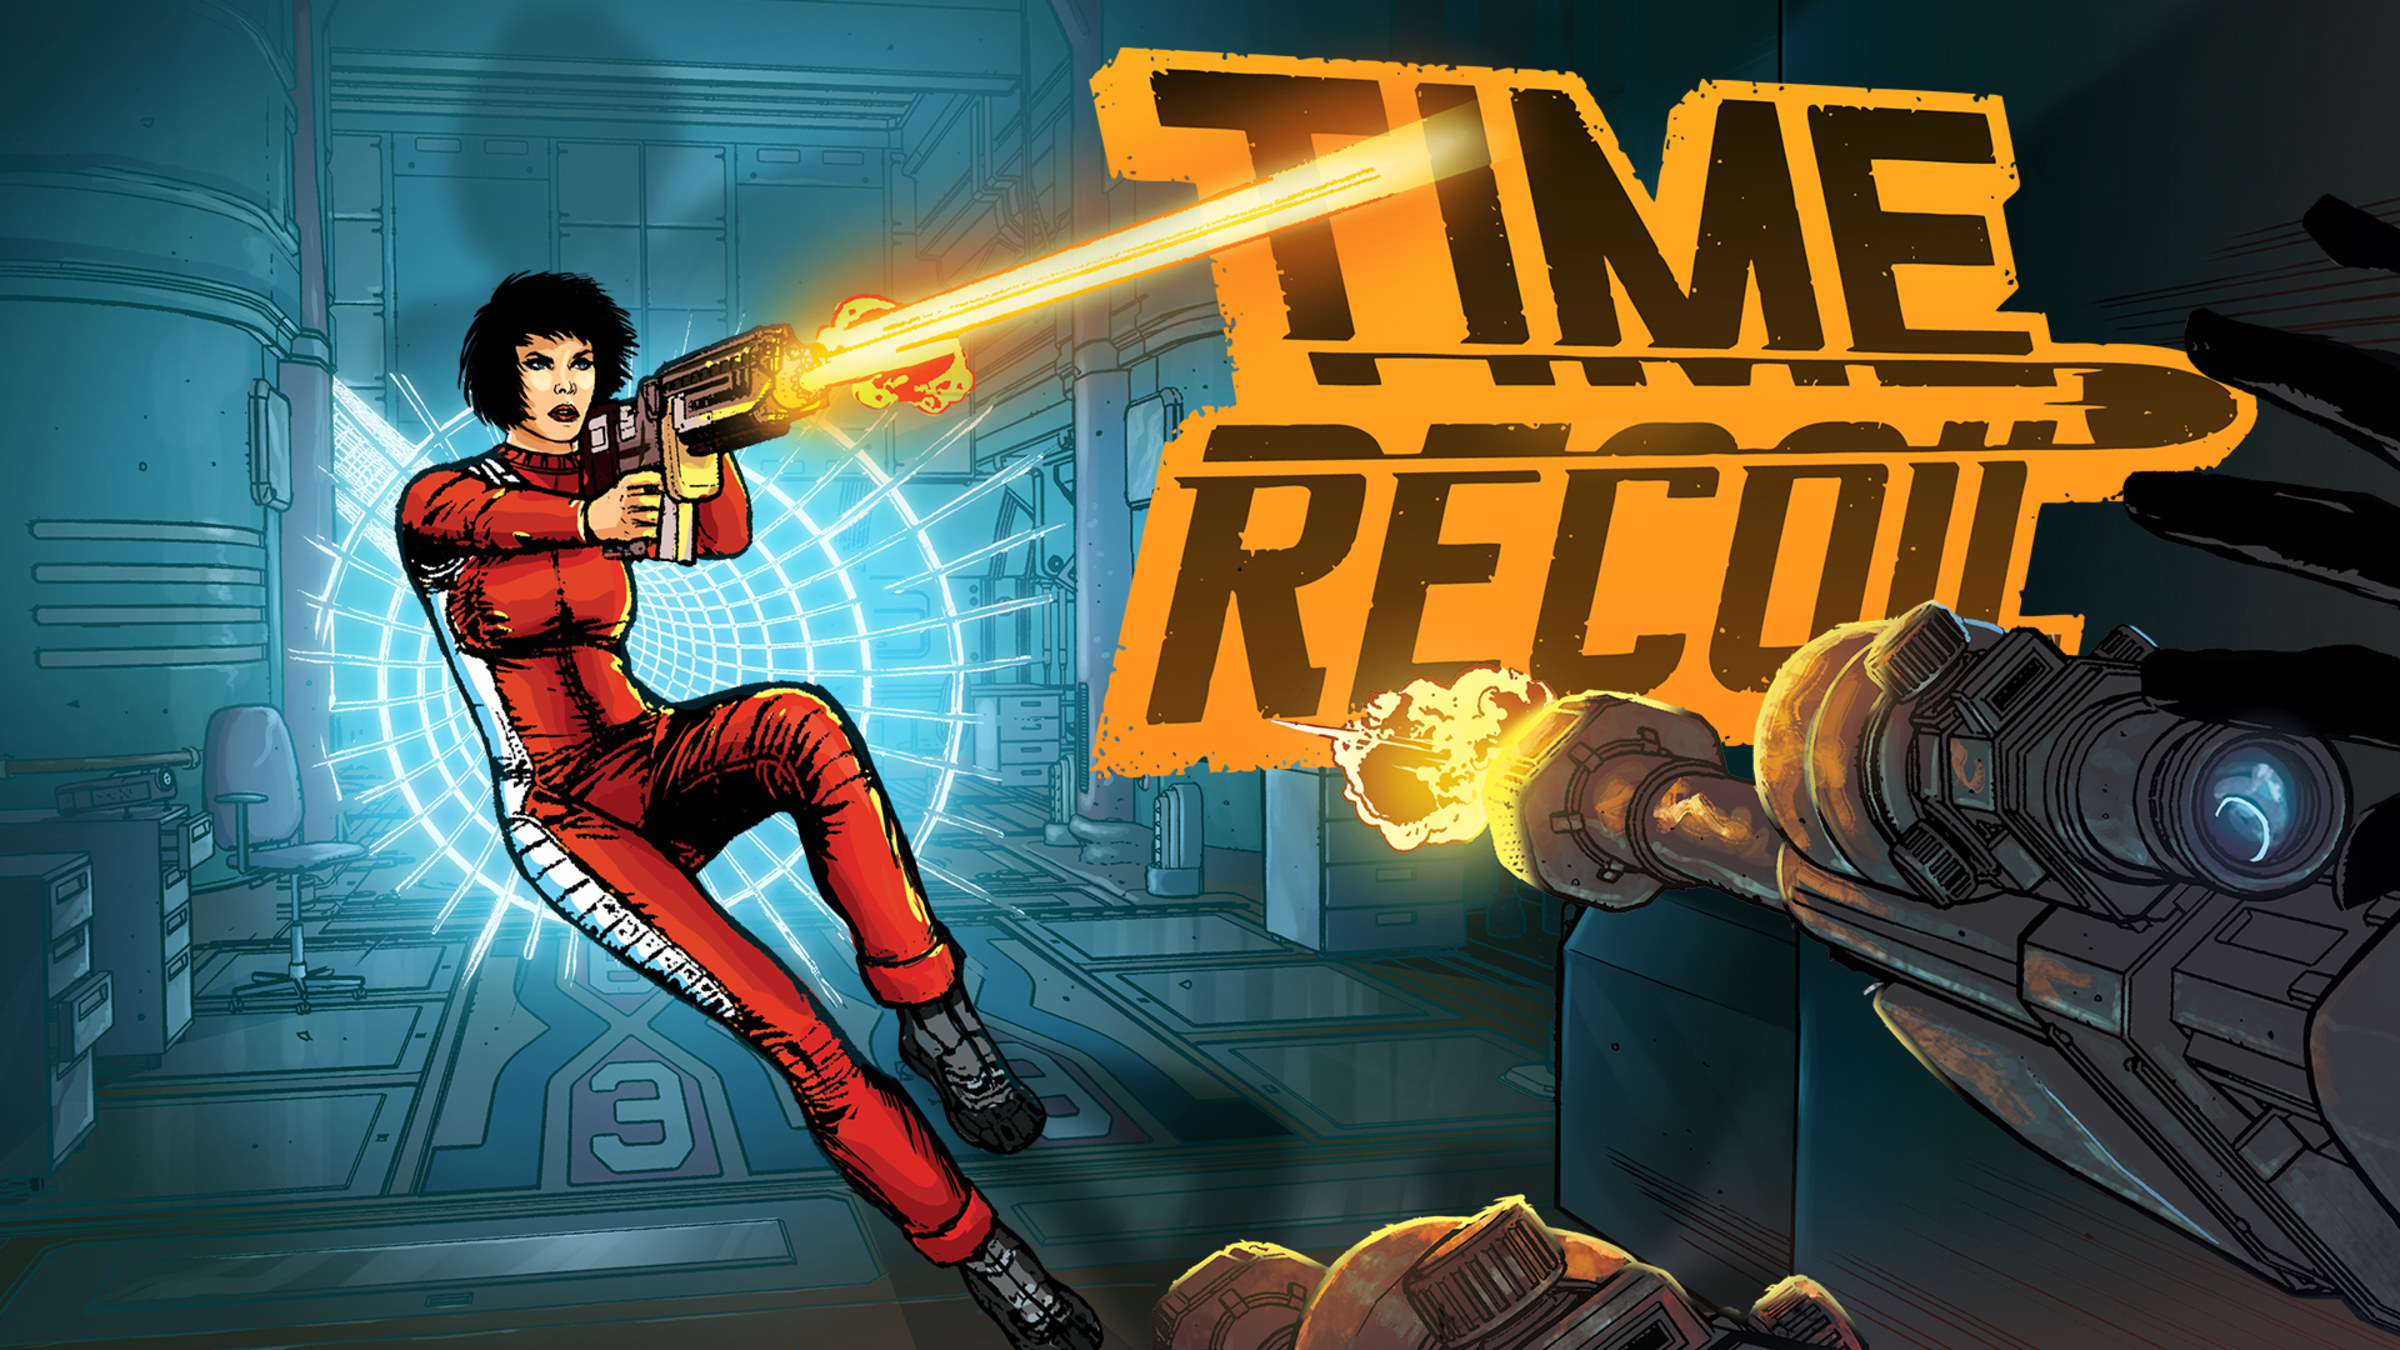 Time Recoil for Nintendo Switch